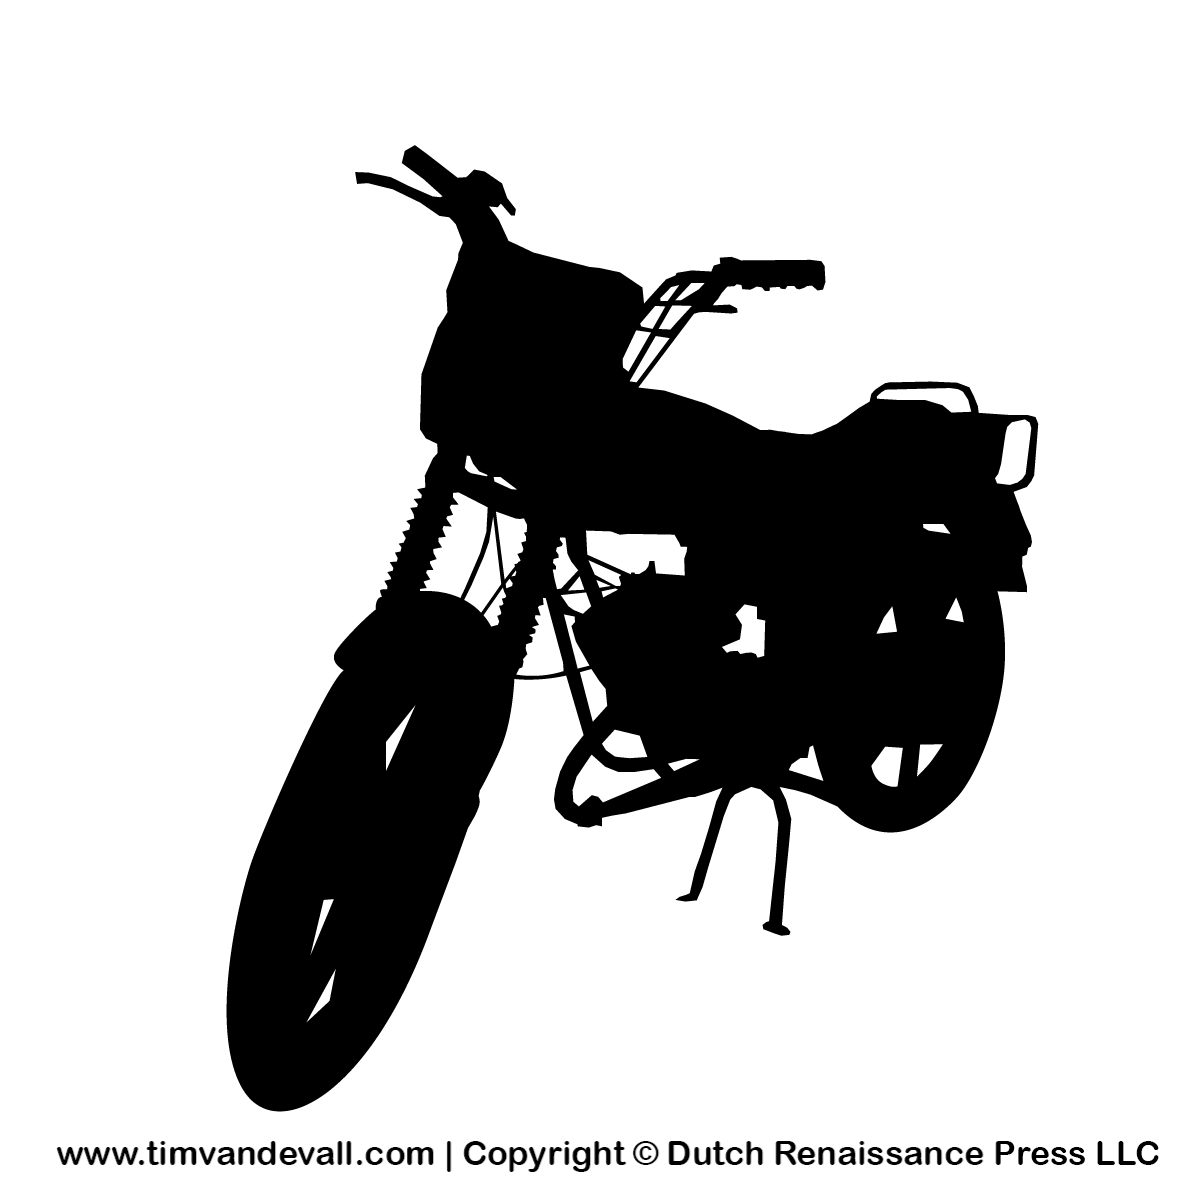 Motorcycle Silhouette Stencil